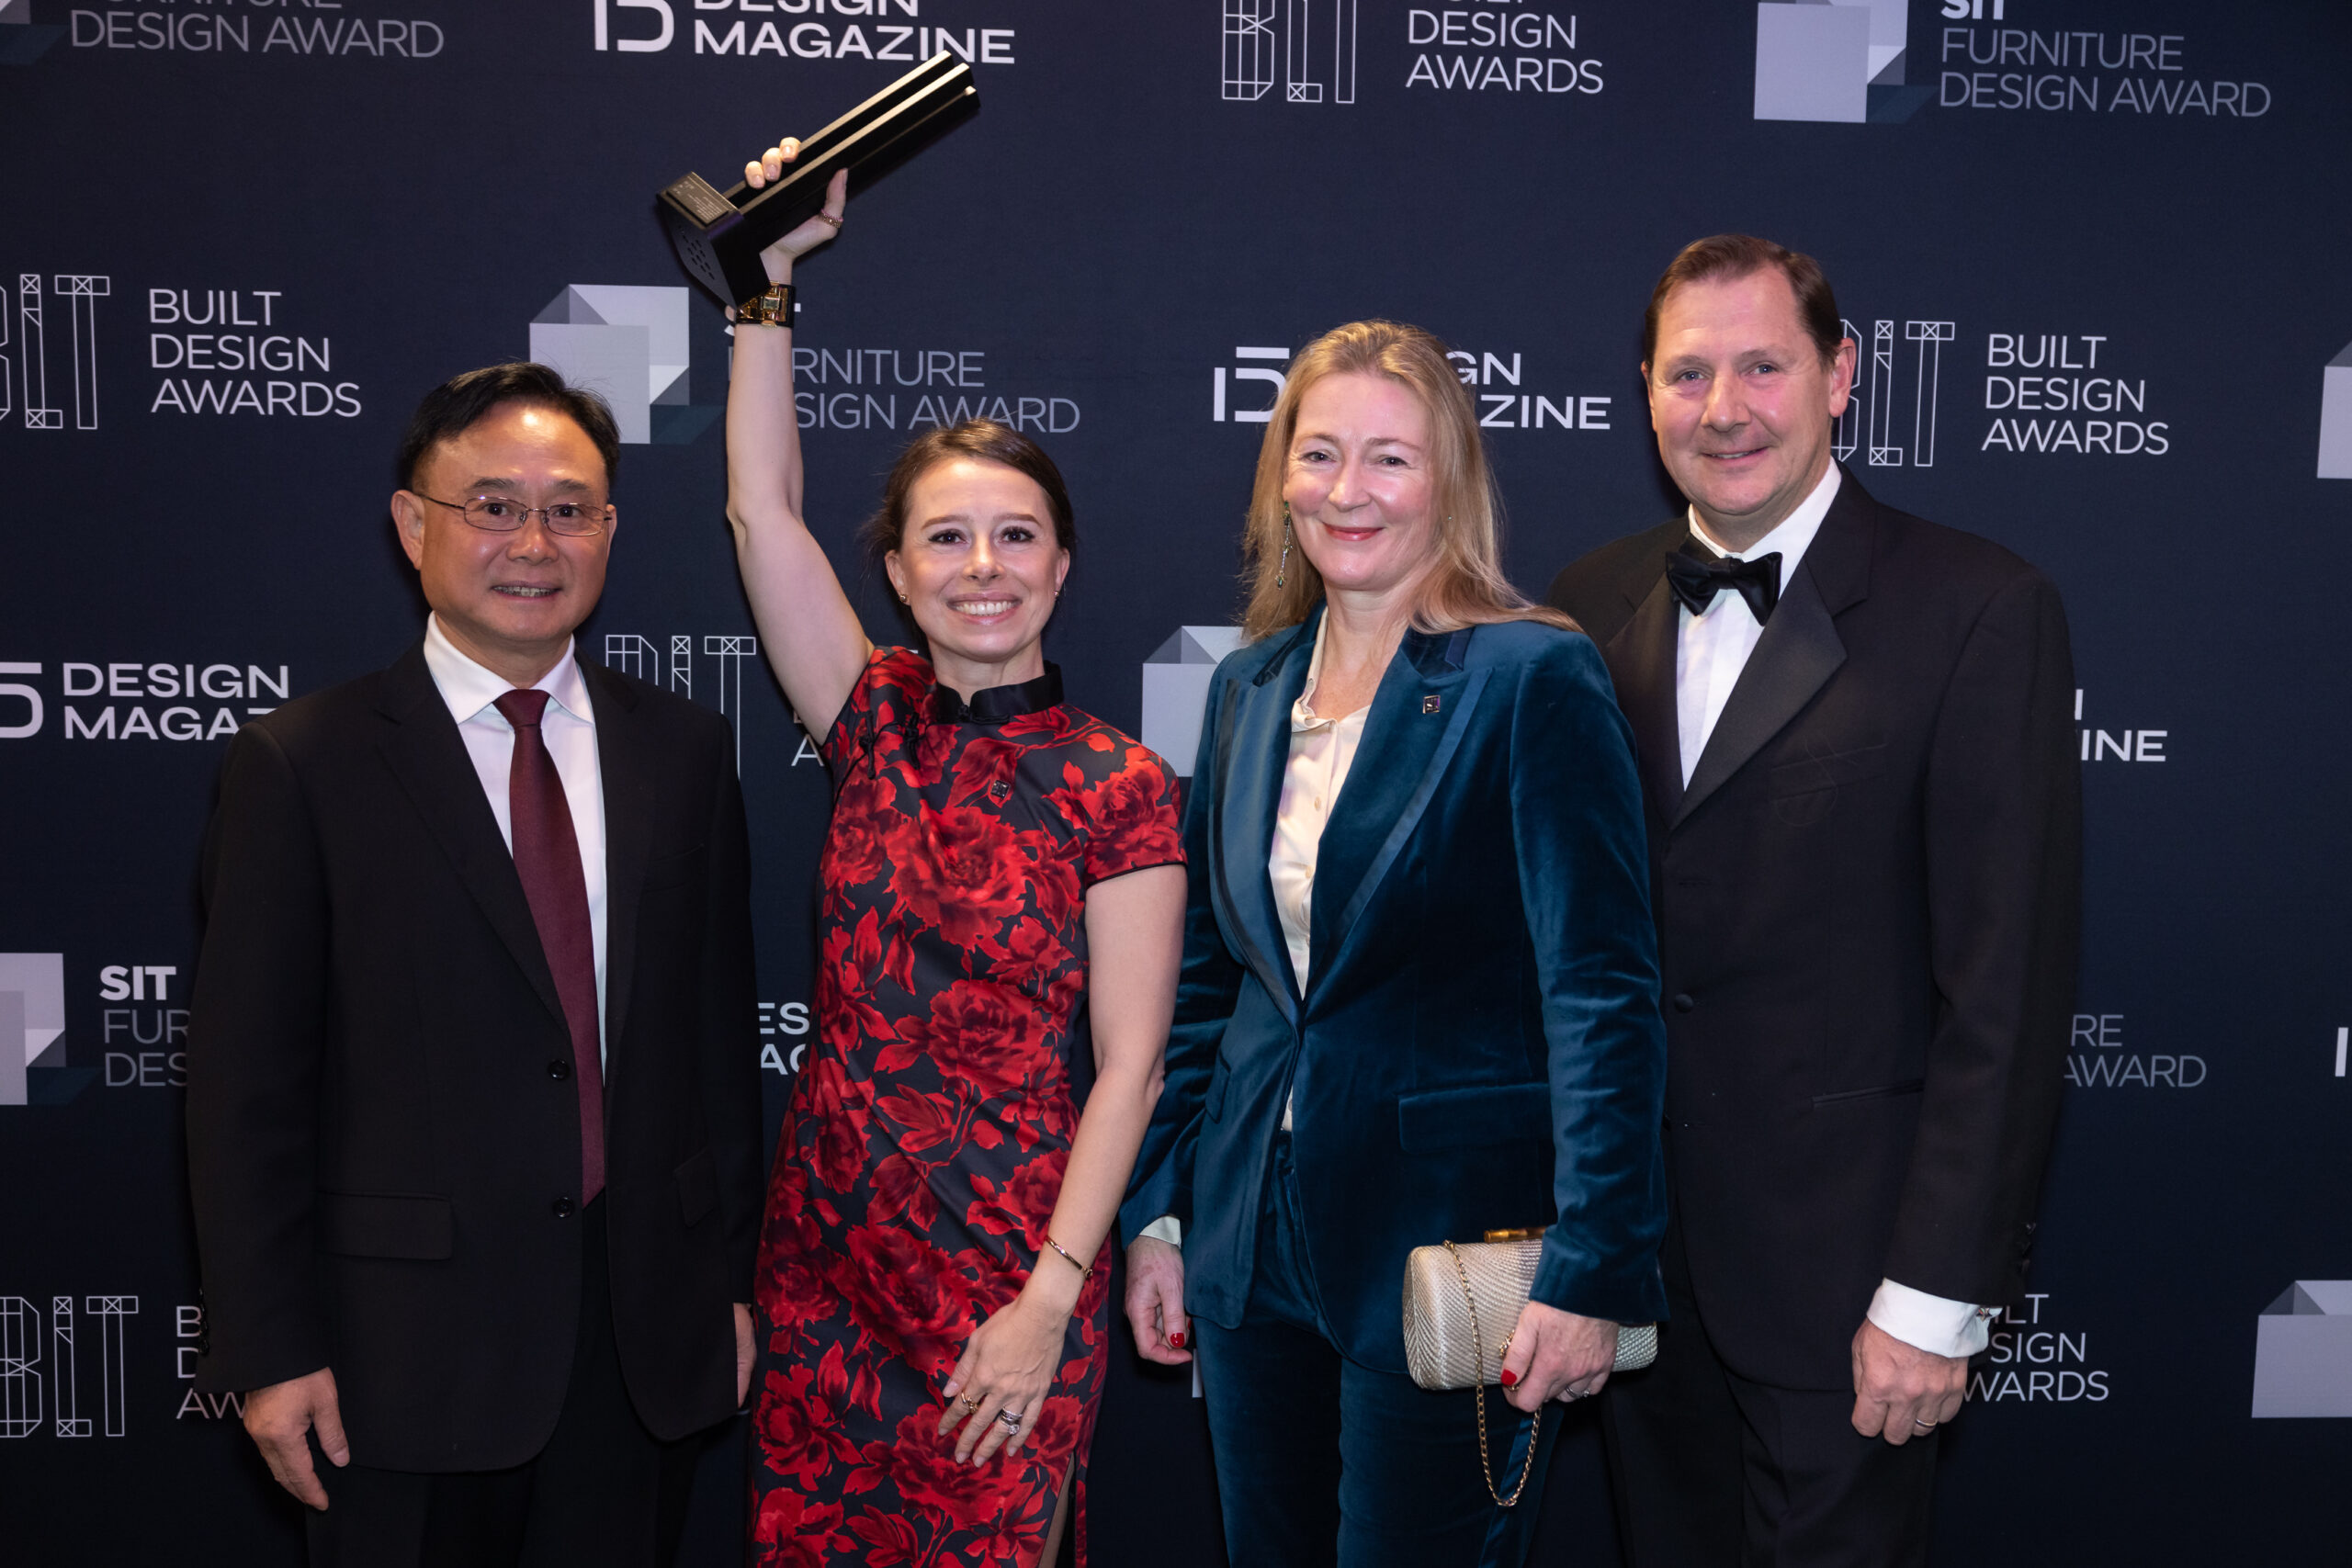 The BLT Built Design Awards, a prestigious celebration of innovation and excellence in architecture and design, took center stage at the iconic KKL Luzern, Switzerland, last Saturday, November 18th